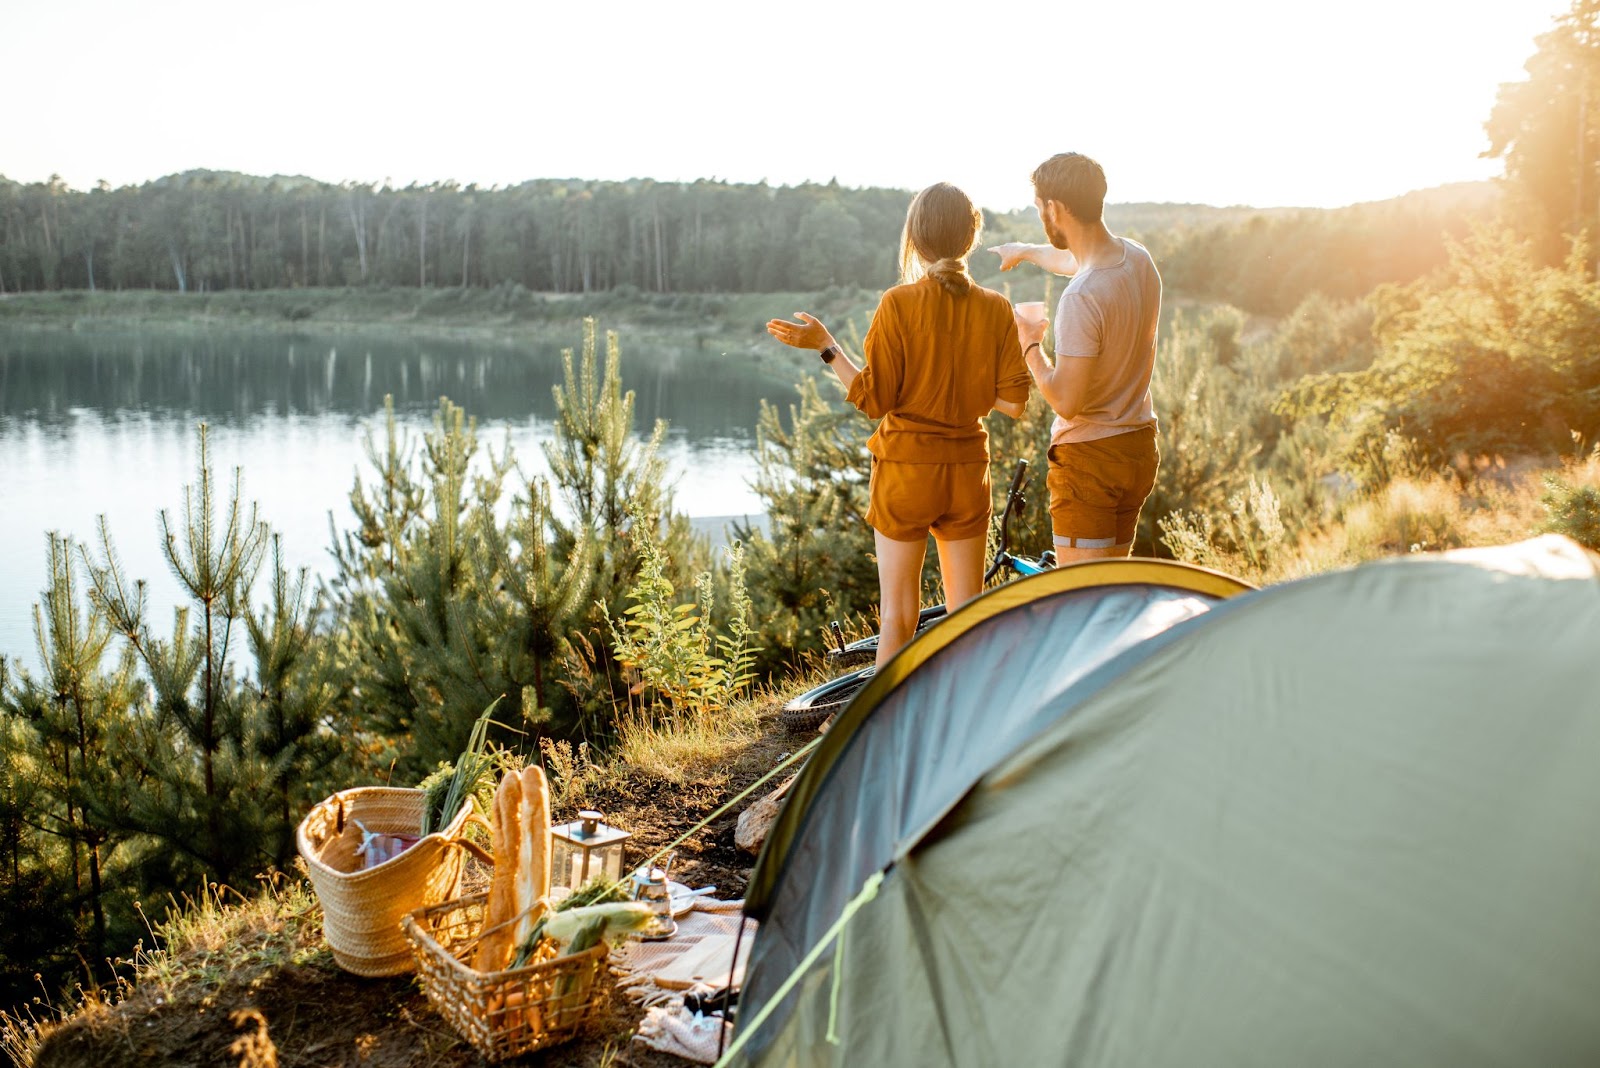 Couple camping and picnic near the lake together.